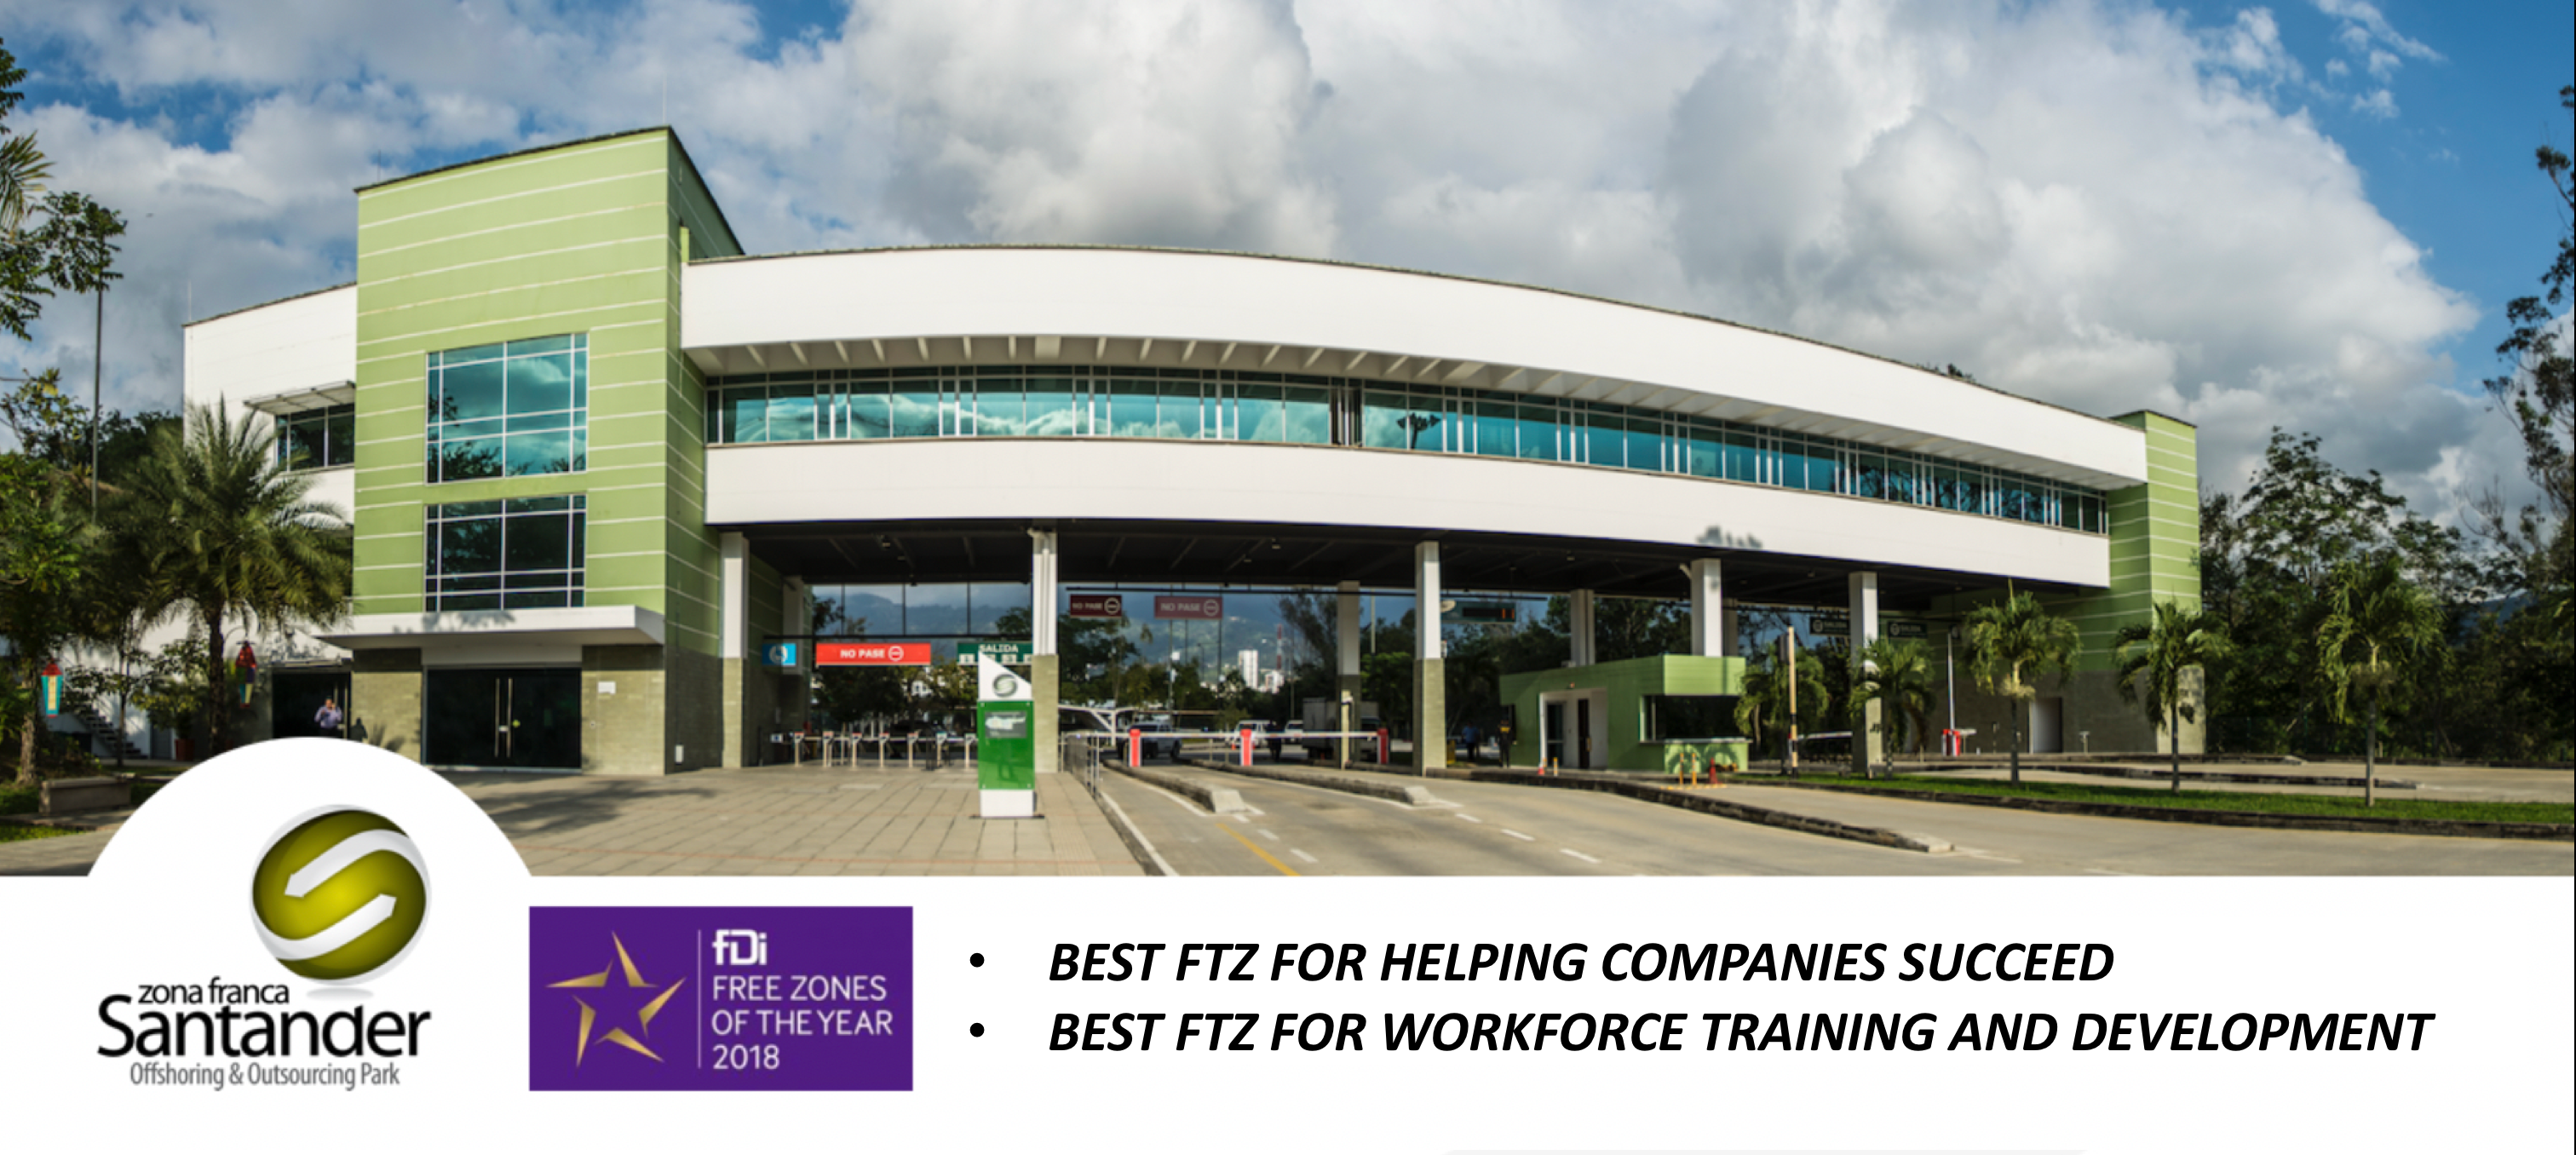 Zona Franca Santander is recognized worldwide as the Best FTZ for helping companies succeed and is the Best FTZ for workforce training and development